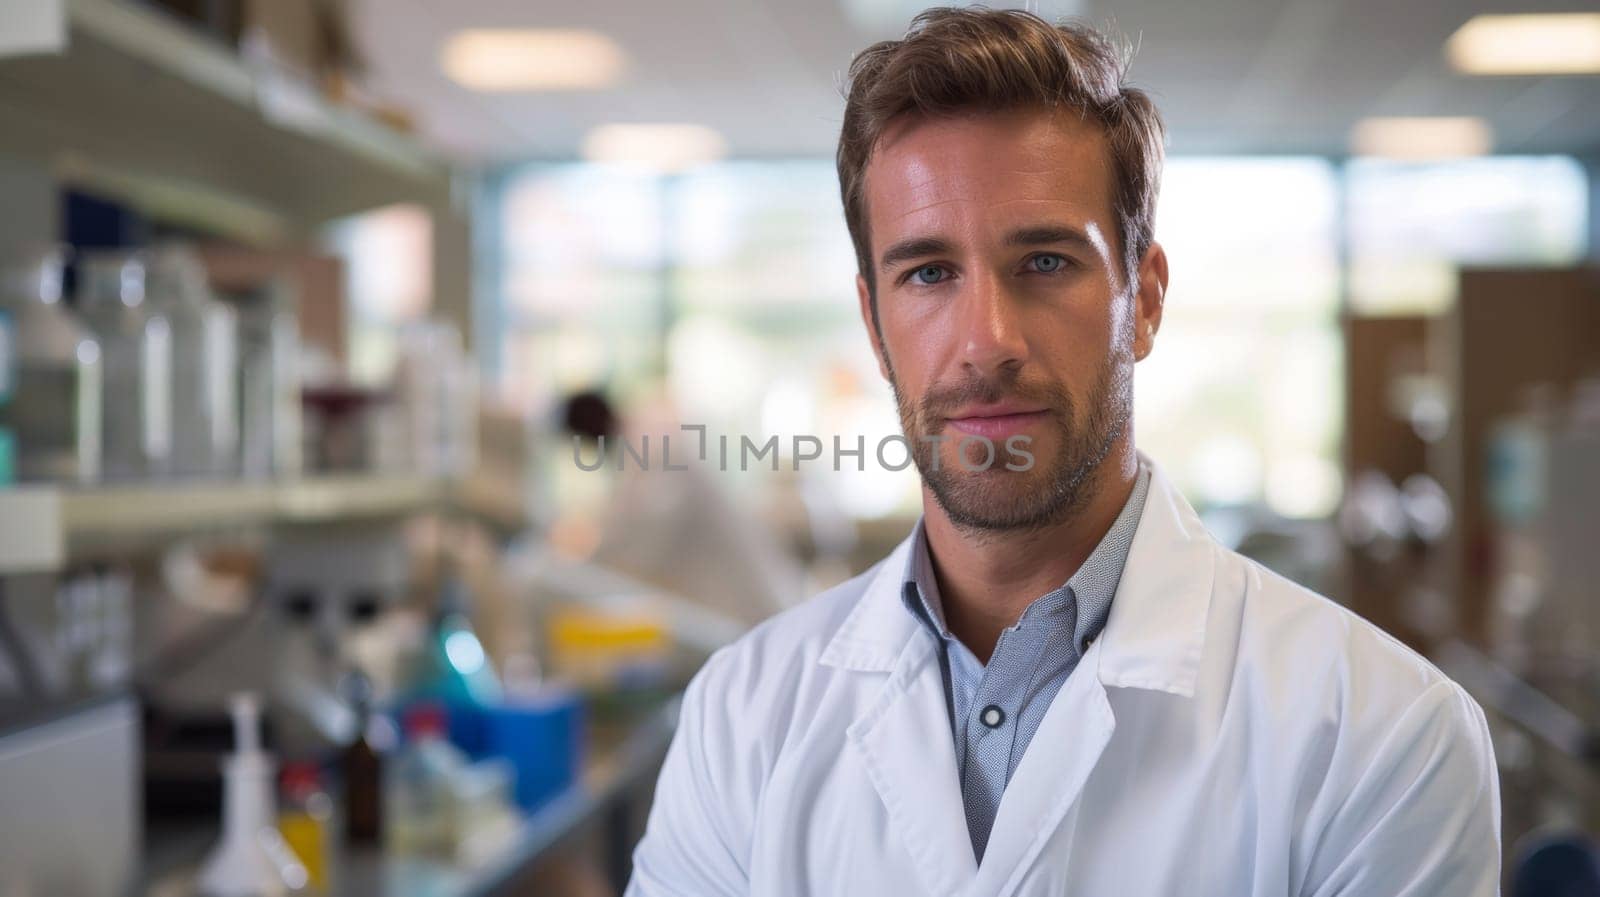 A man in lab coat standing with arms crossed and looking at camera